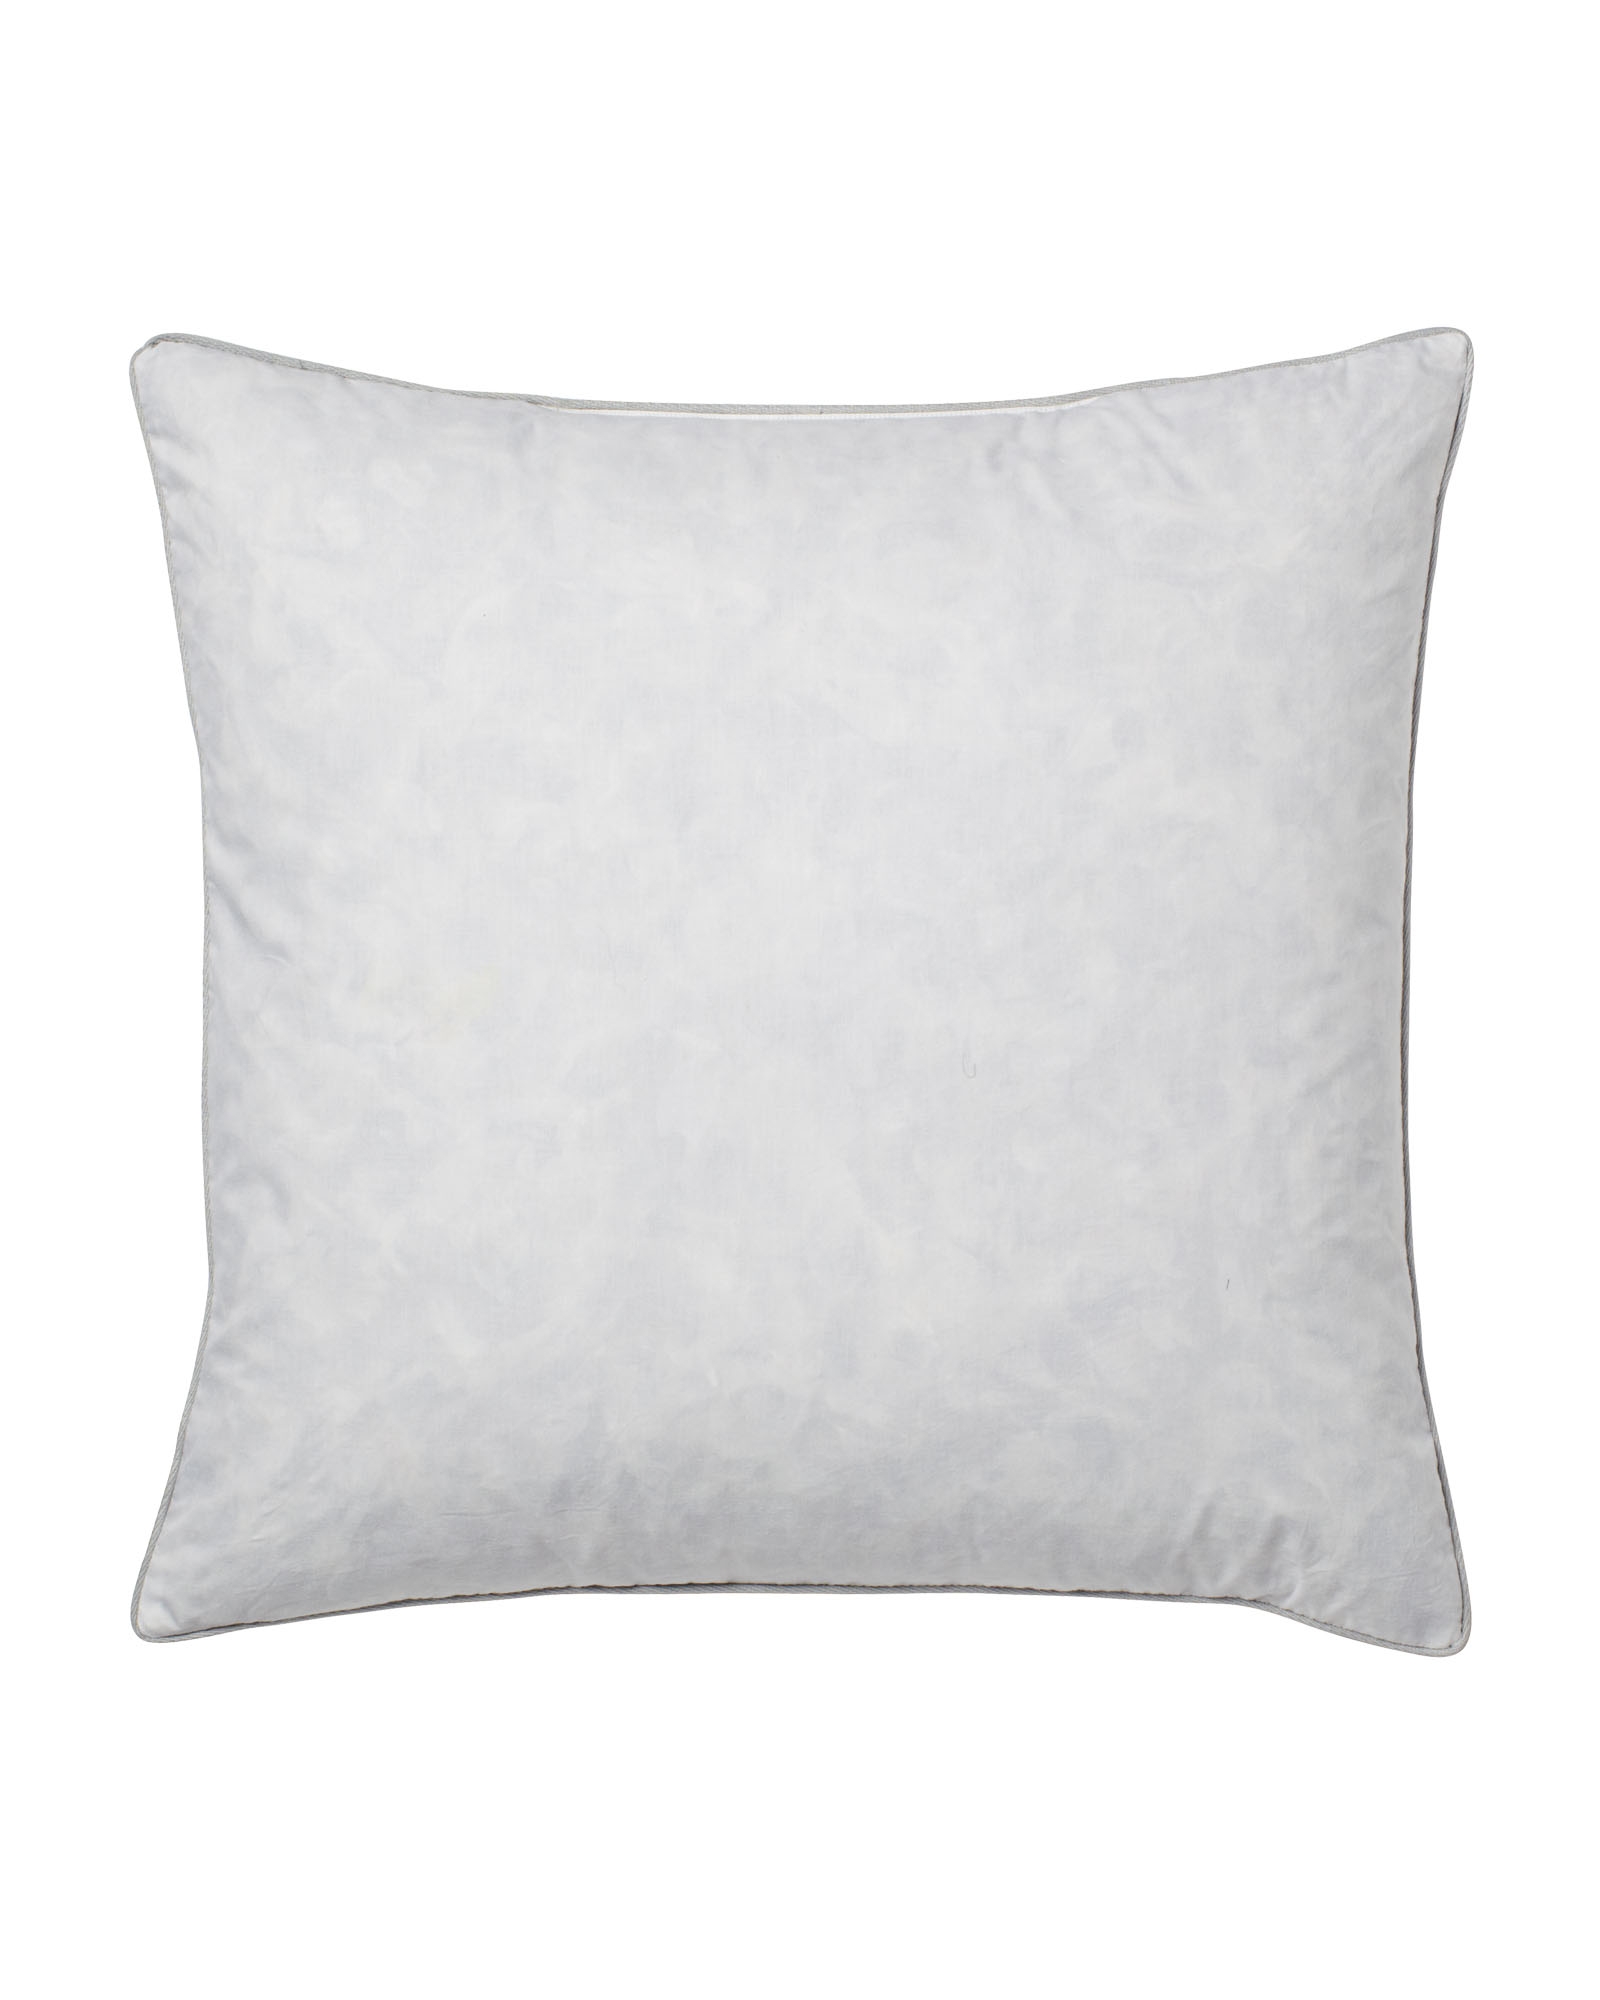 Pillow Insert - 20" sq - feather/down - Image 0